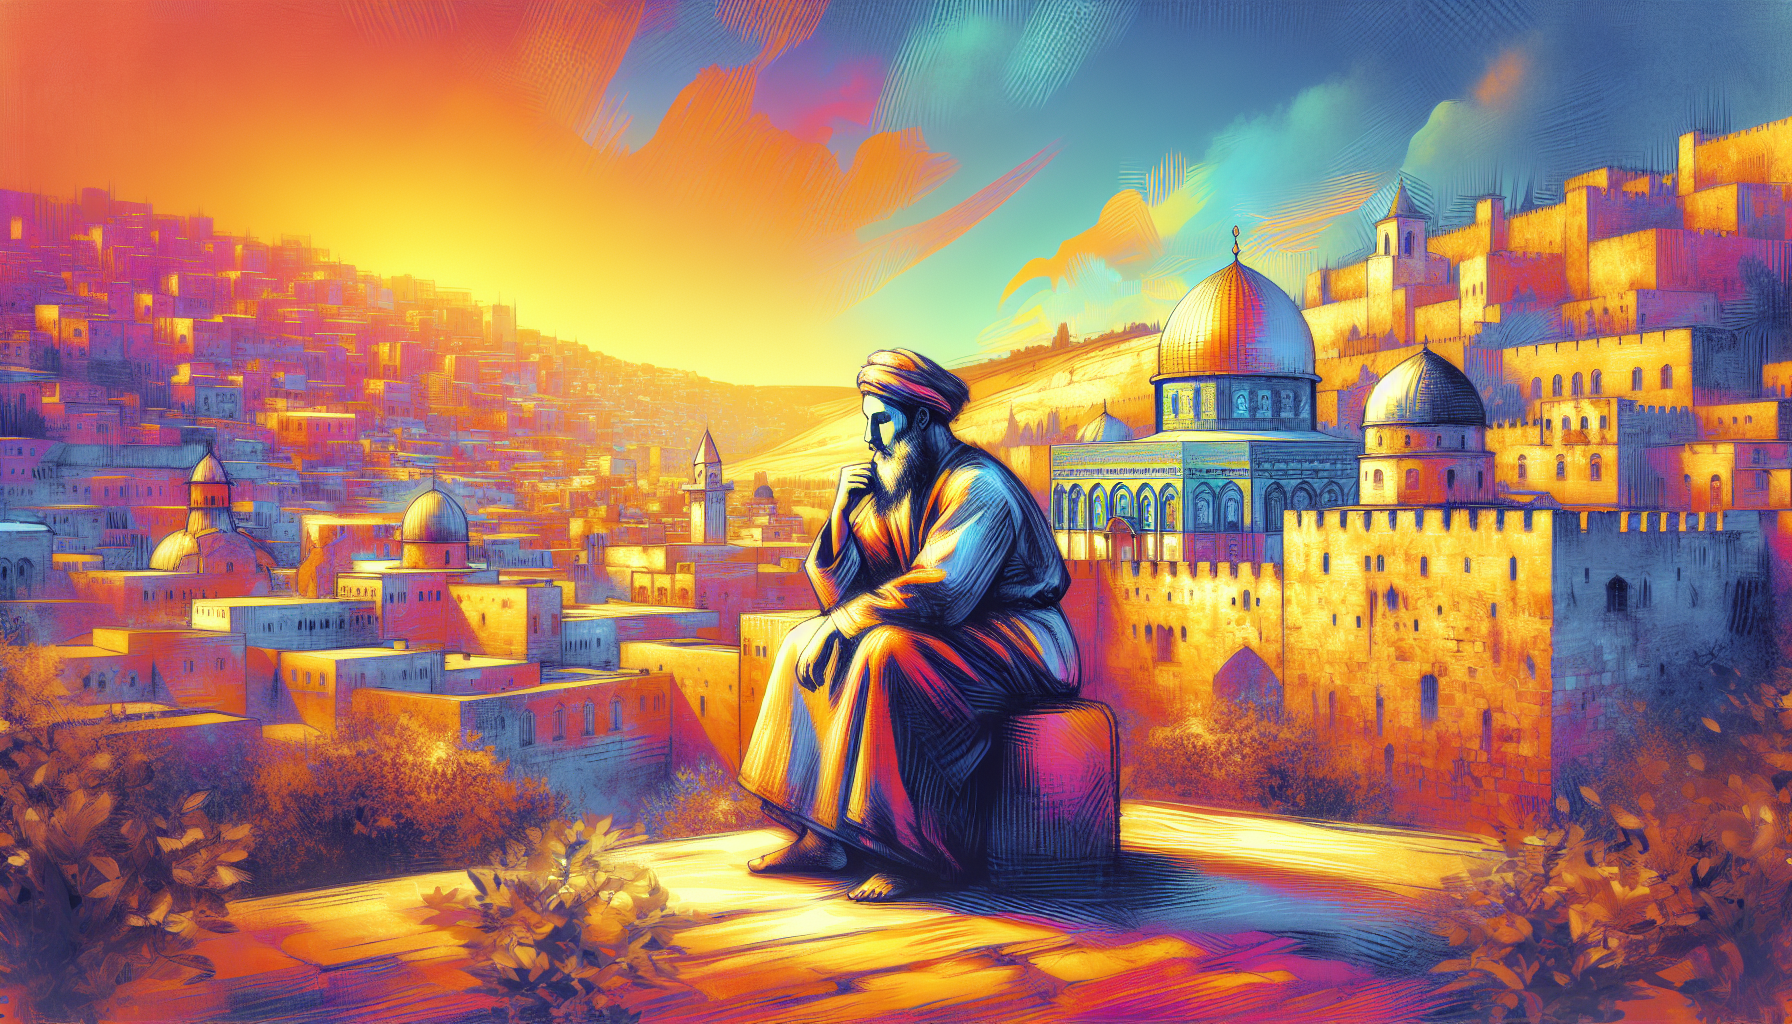 An artistic interpretation of ancient Jerusalem with a serene and reflective Jesus contemplating life, set against a backdrop of historic buildings bathed in the warm light of a setting sun.